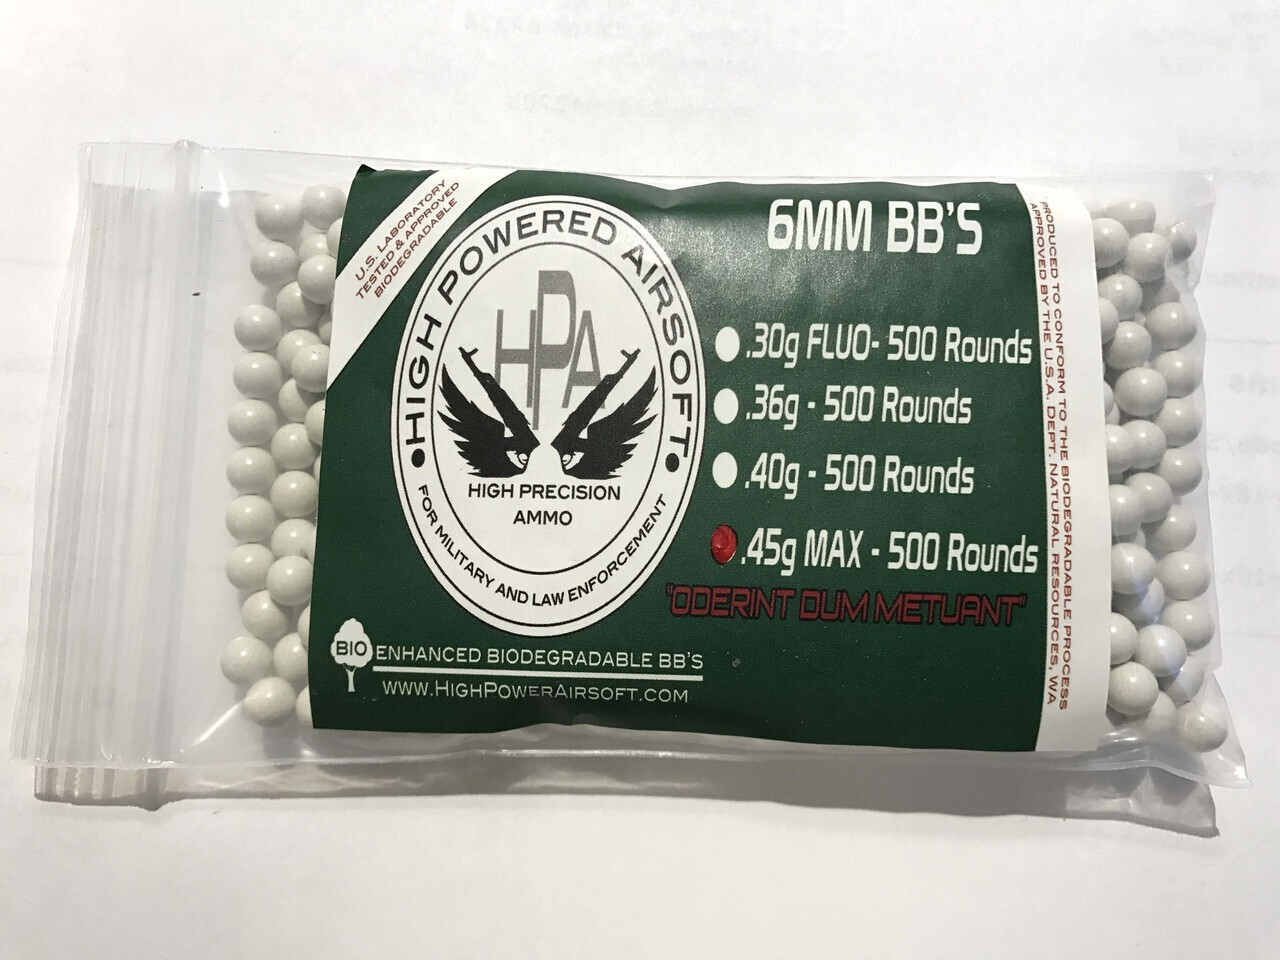 High Powered Airsoft .45g Biodegradable White BBs (approx. 500 bbs)